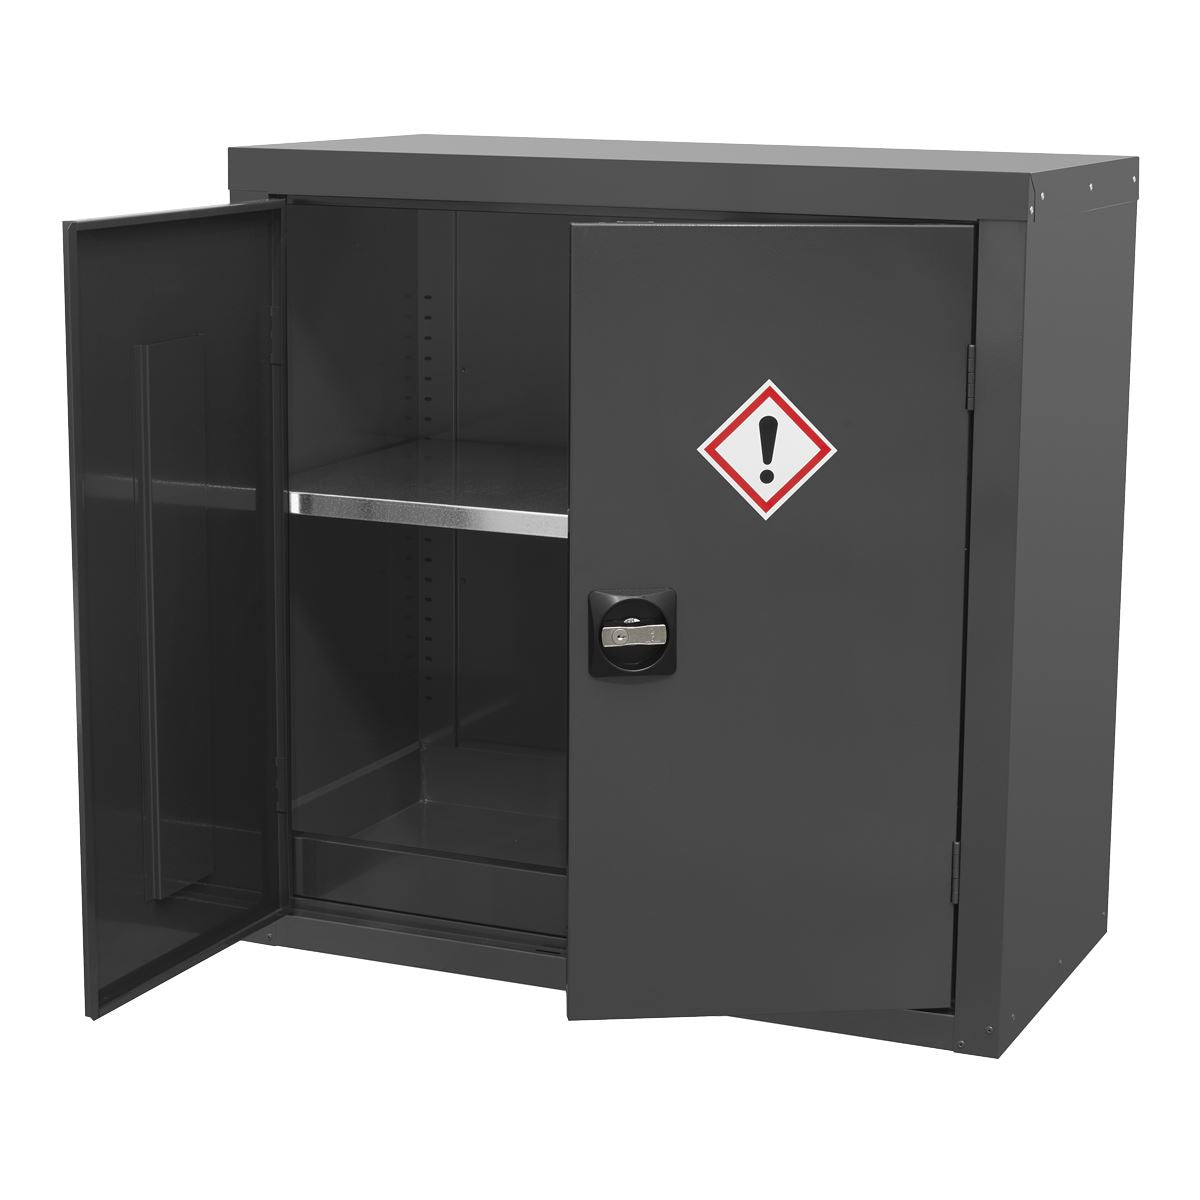 Sealey CoSHH Substance Cabinet 900 x 460 x 900mm